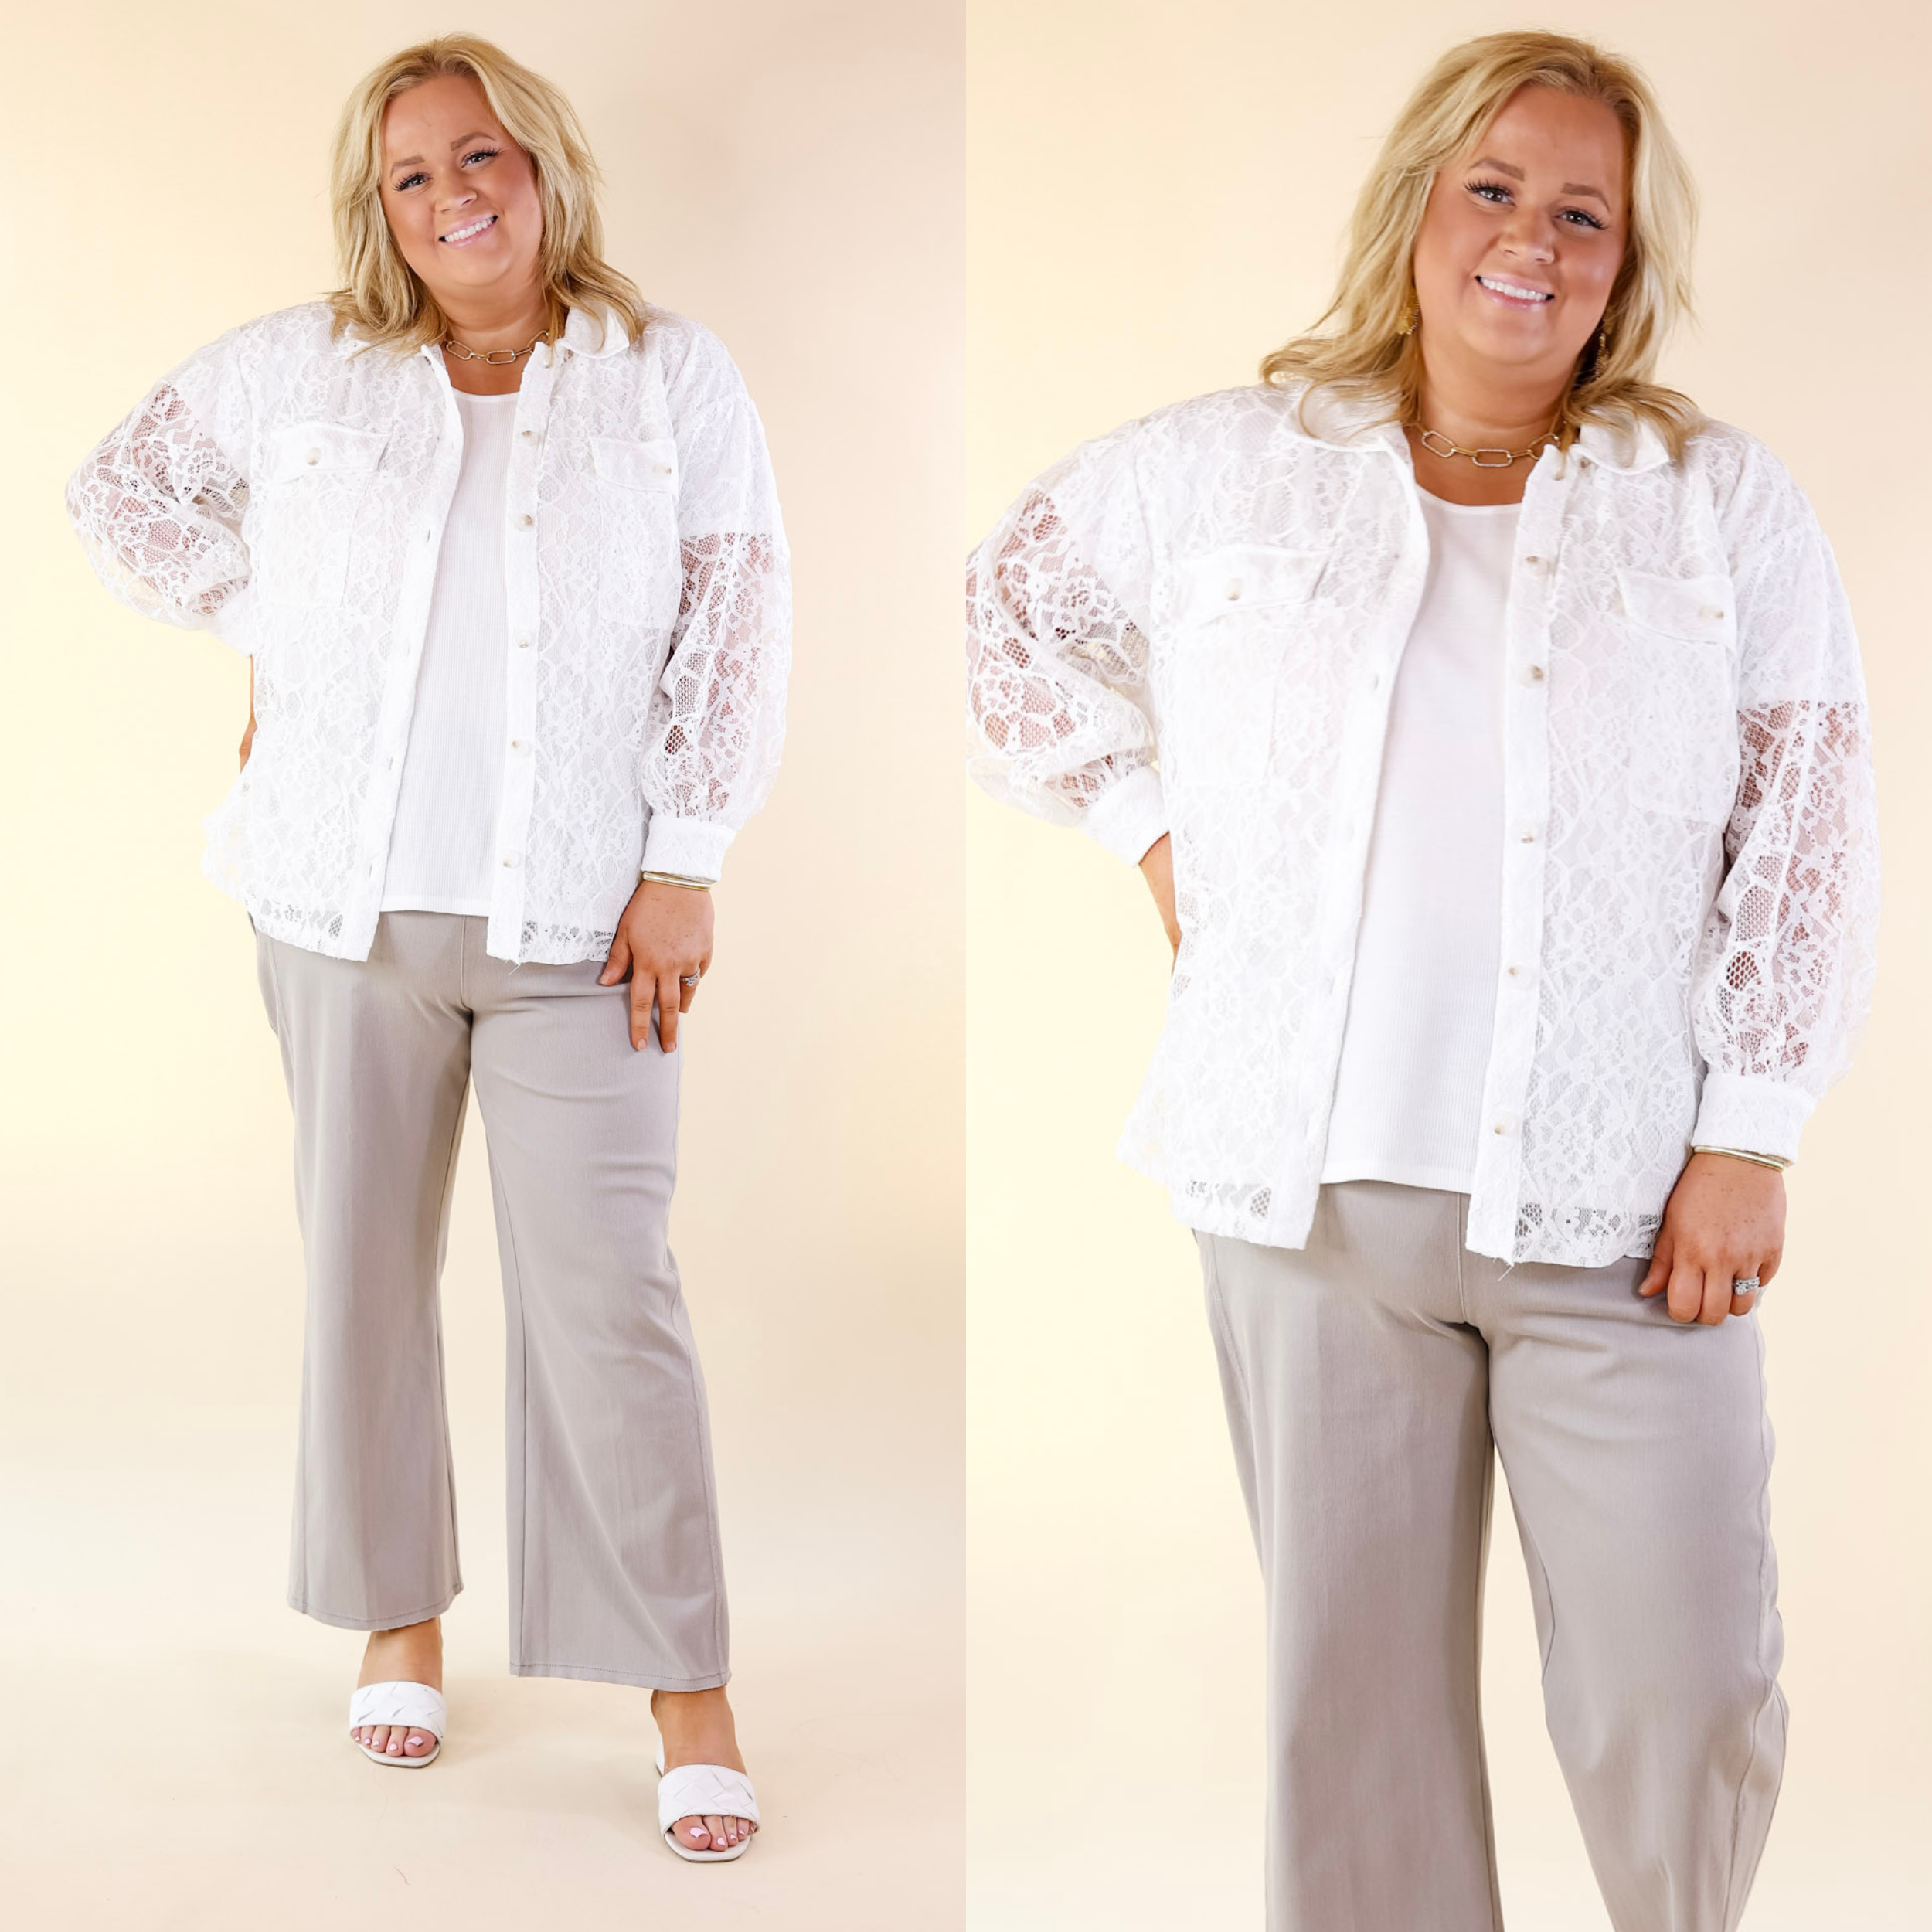 Sheer Chic Collared Button Up Lace Top in White